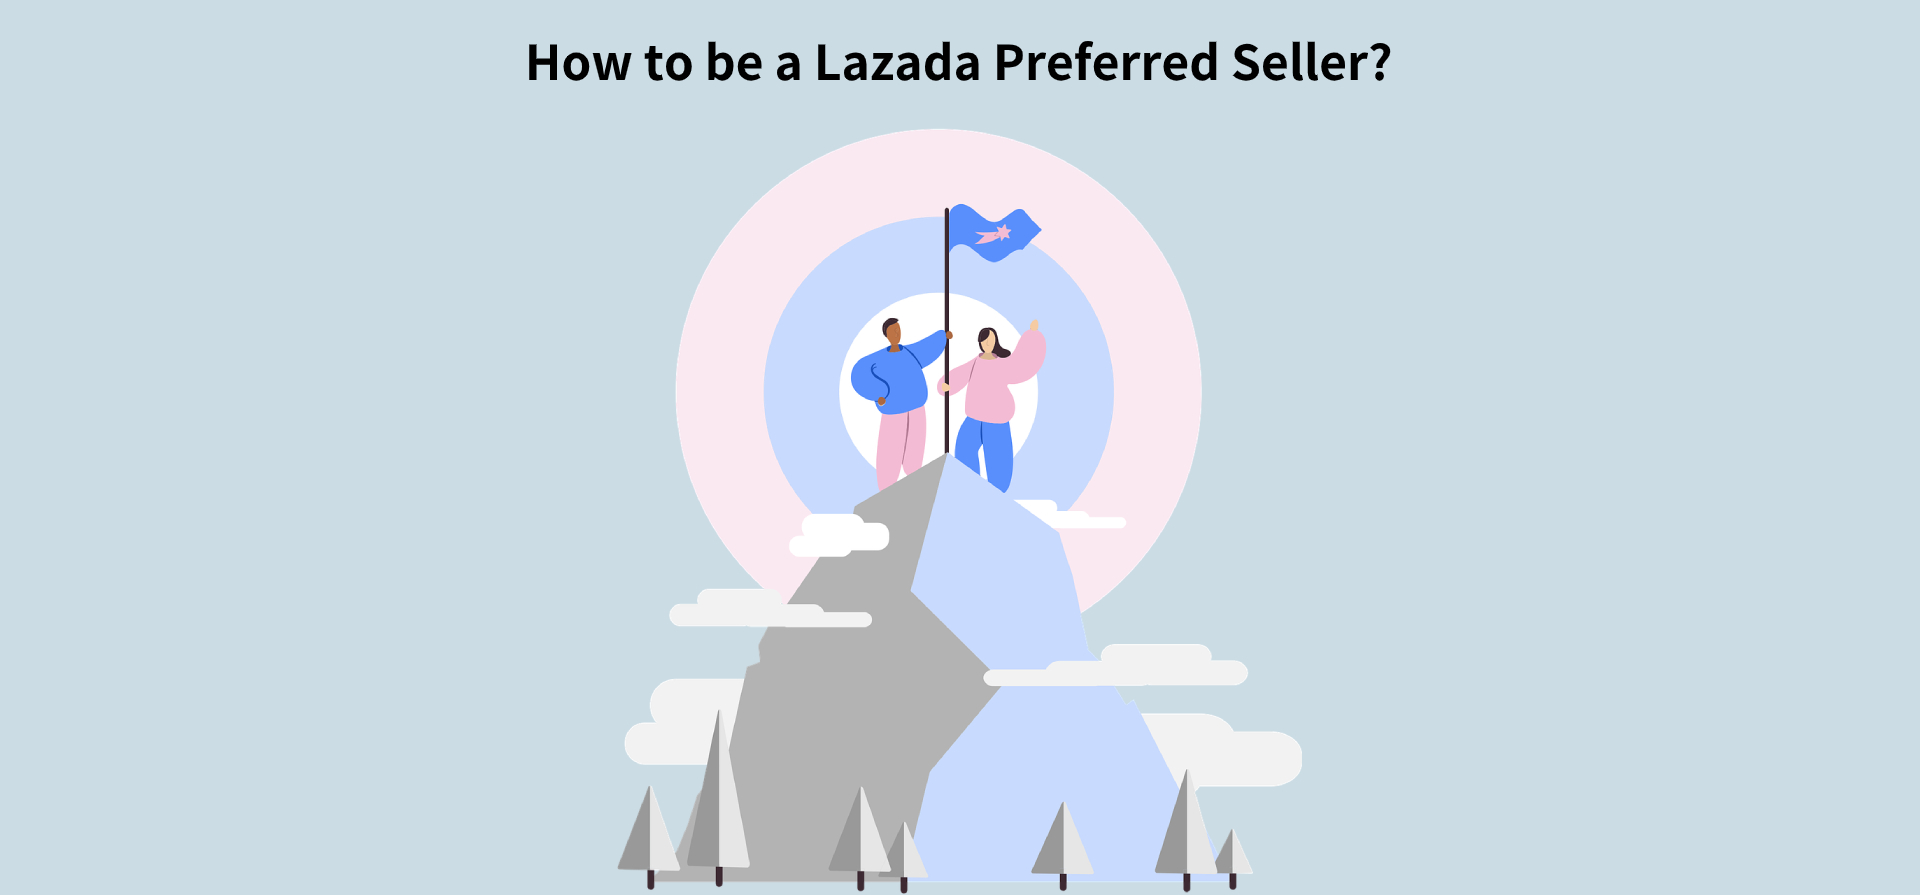 How to be a Lazada Preferred Seller?